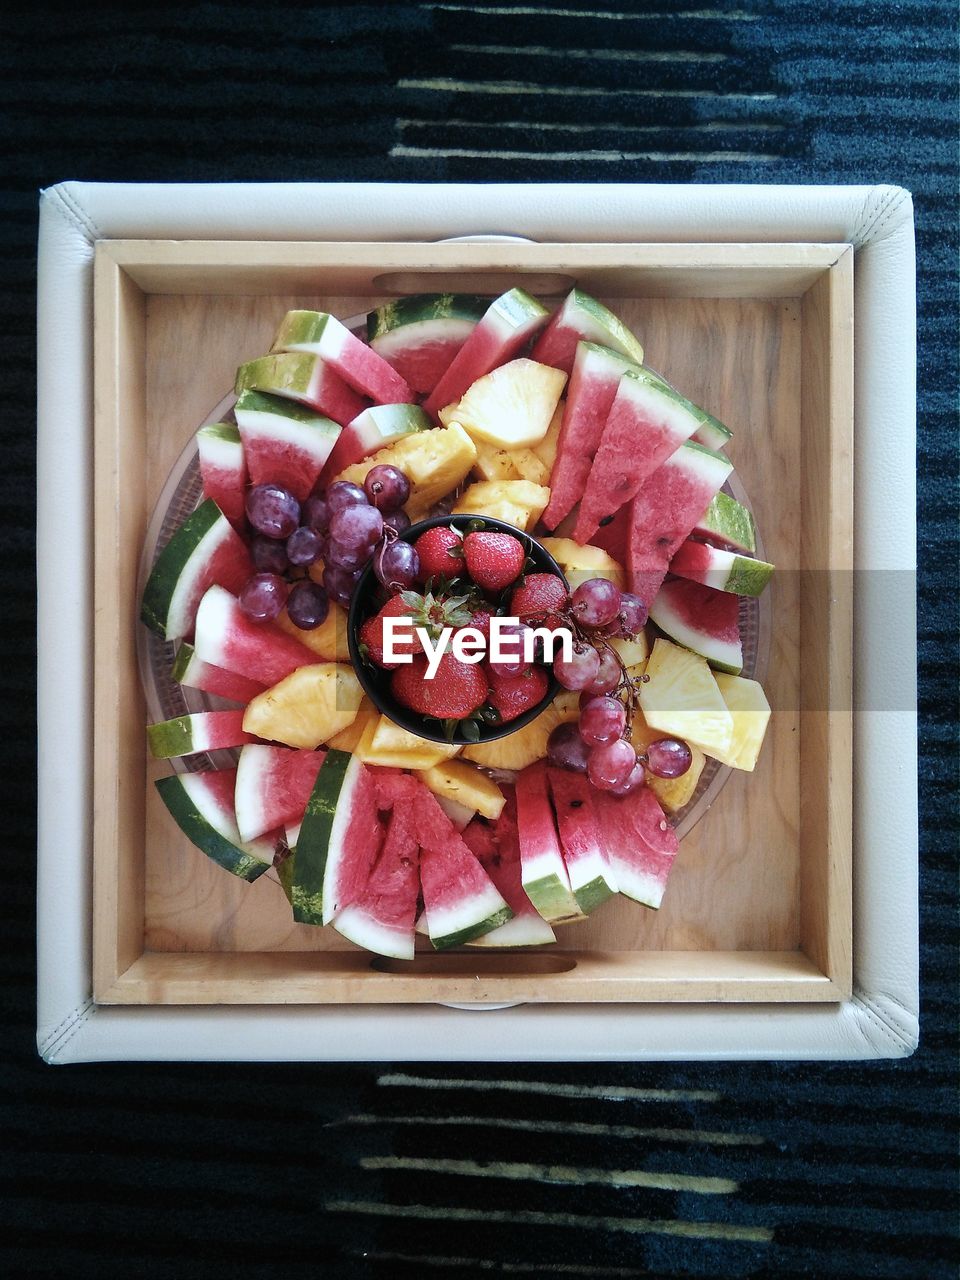 HIGH ANGLE VIEW OF CHOPPED FRUITS ON TABLE